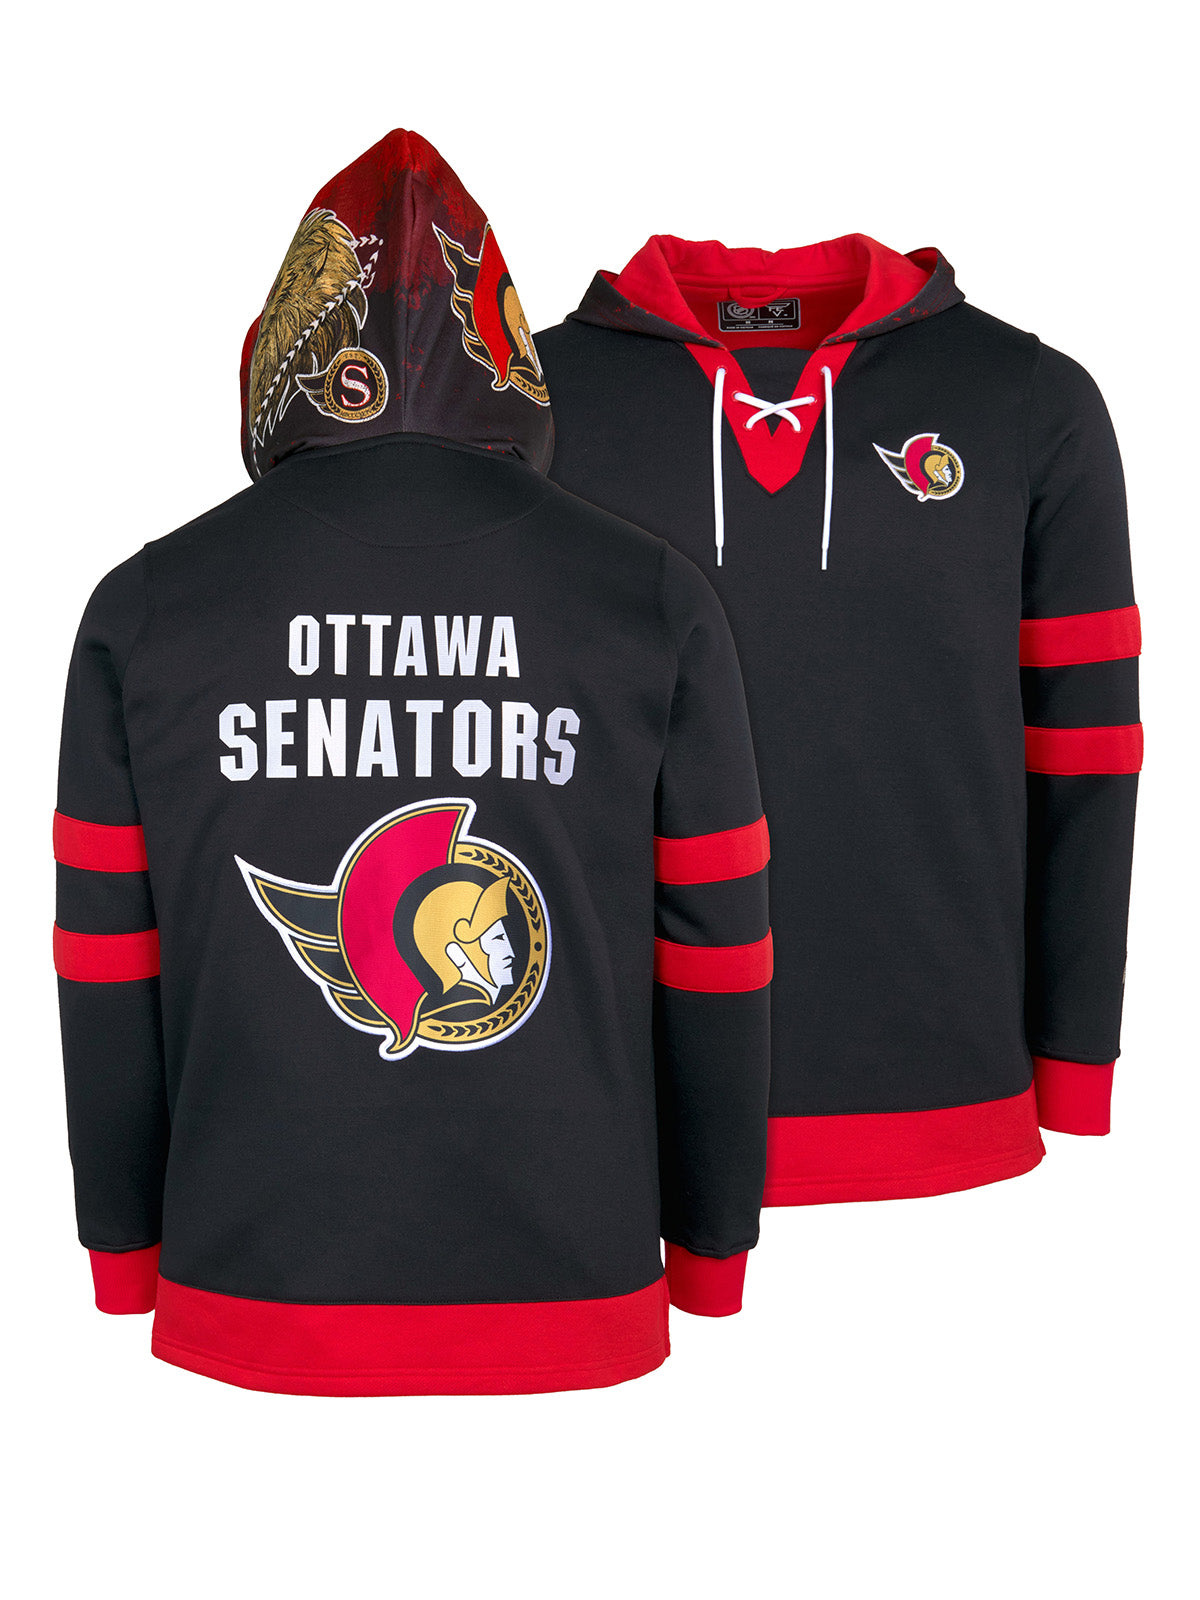 Ottawa Senators Lace-Up Hoodie - Hand drawn custom hood designs with all the team colors and craftmanship to replicate the gameday jersey of this NHL hoodie